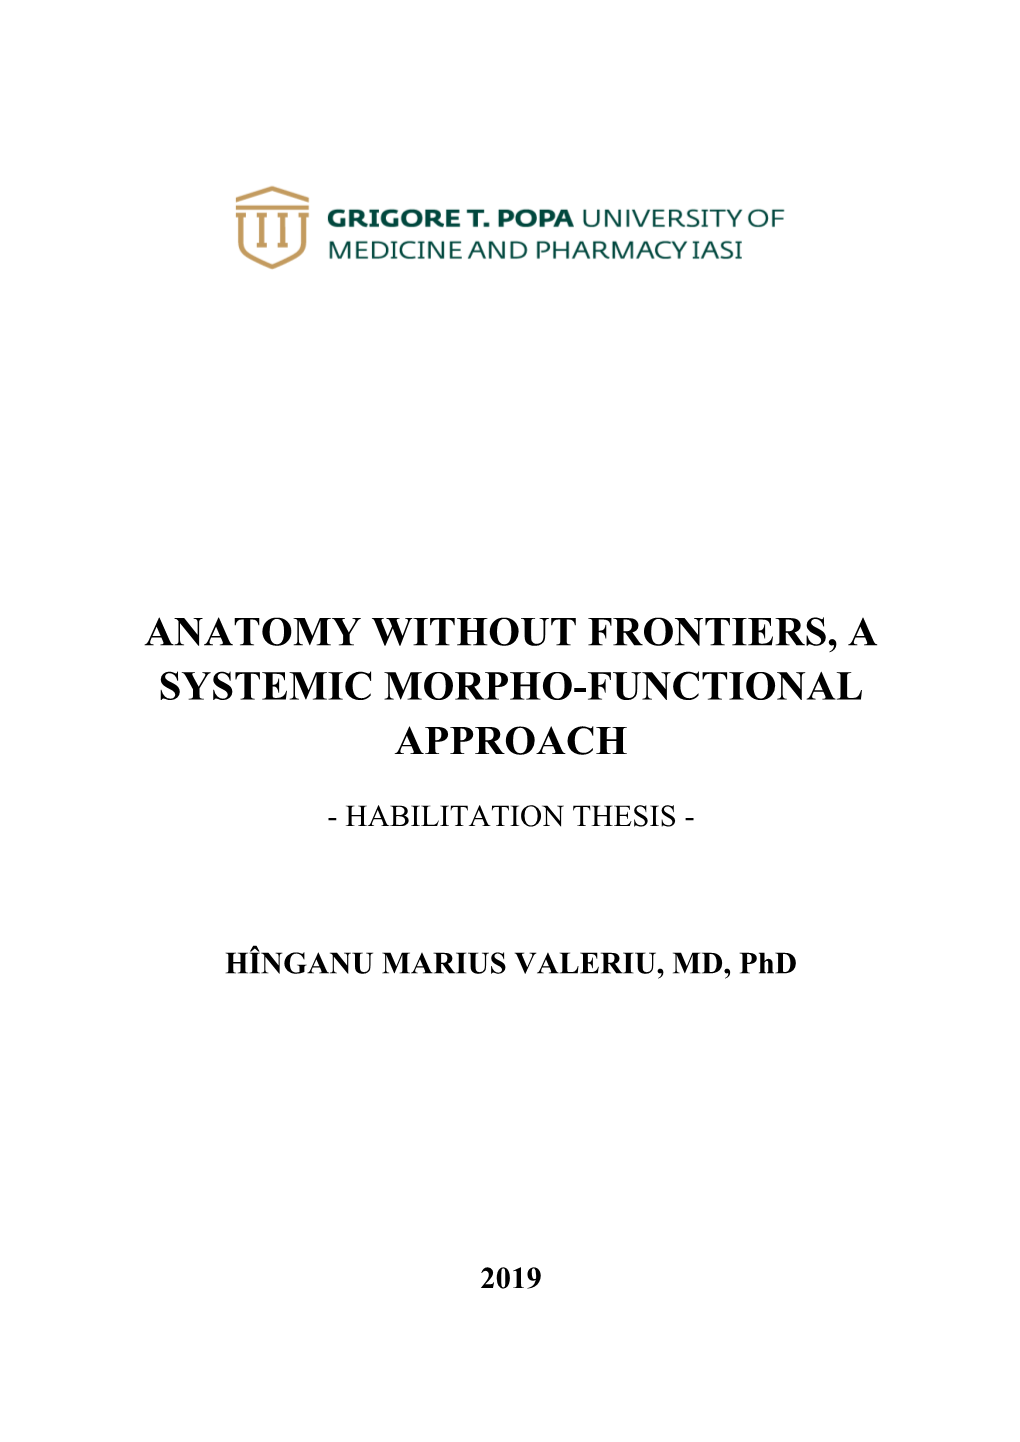 Anatomy Without Frontiers, a Systemic Morpho-Functional Approach